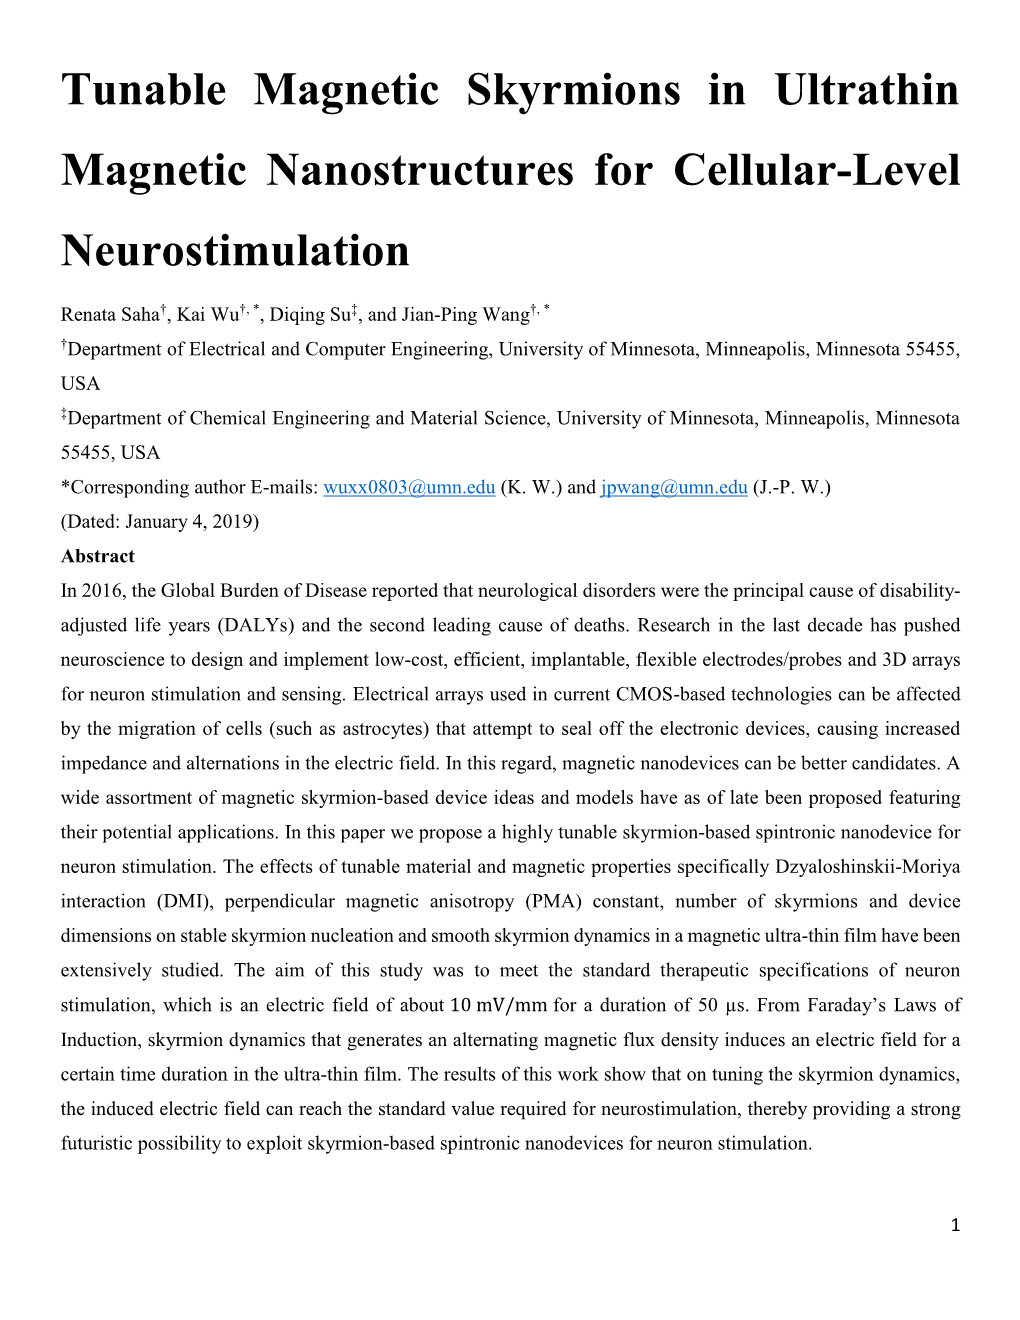 Tunable Magnetic Skyrmions in Ultrathin Magnetic Nanostructures for Cellular-Level Neurostimulation